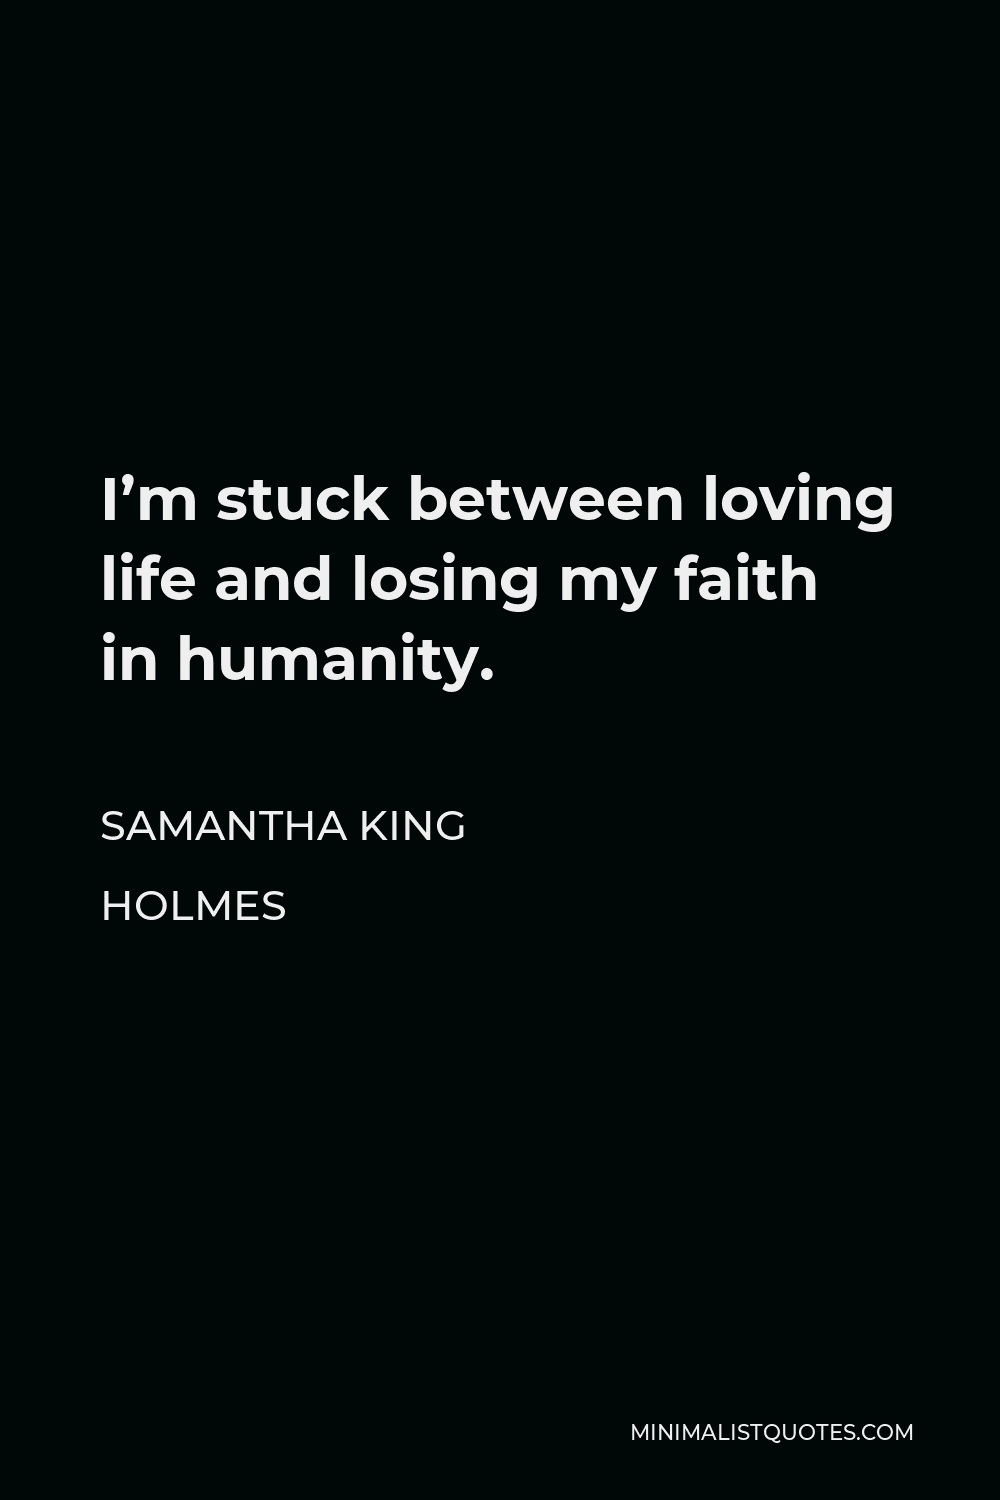 Samantha King Holmes Quote - I’m stuck between loving life and losing my faith in humanity.